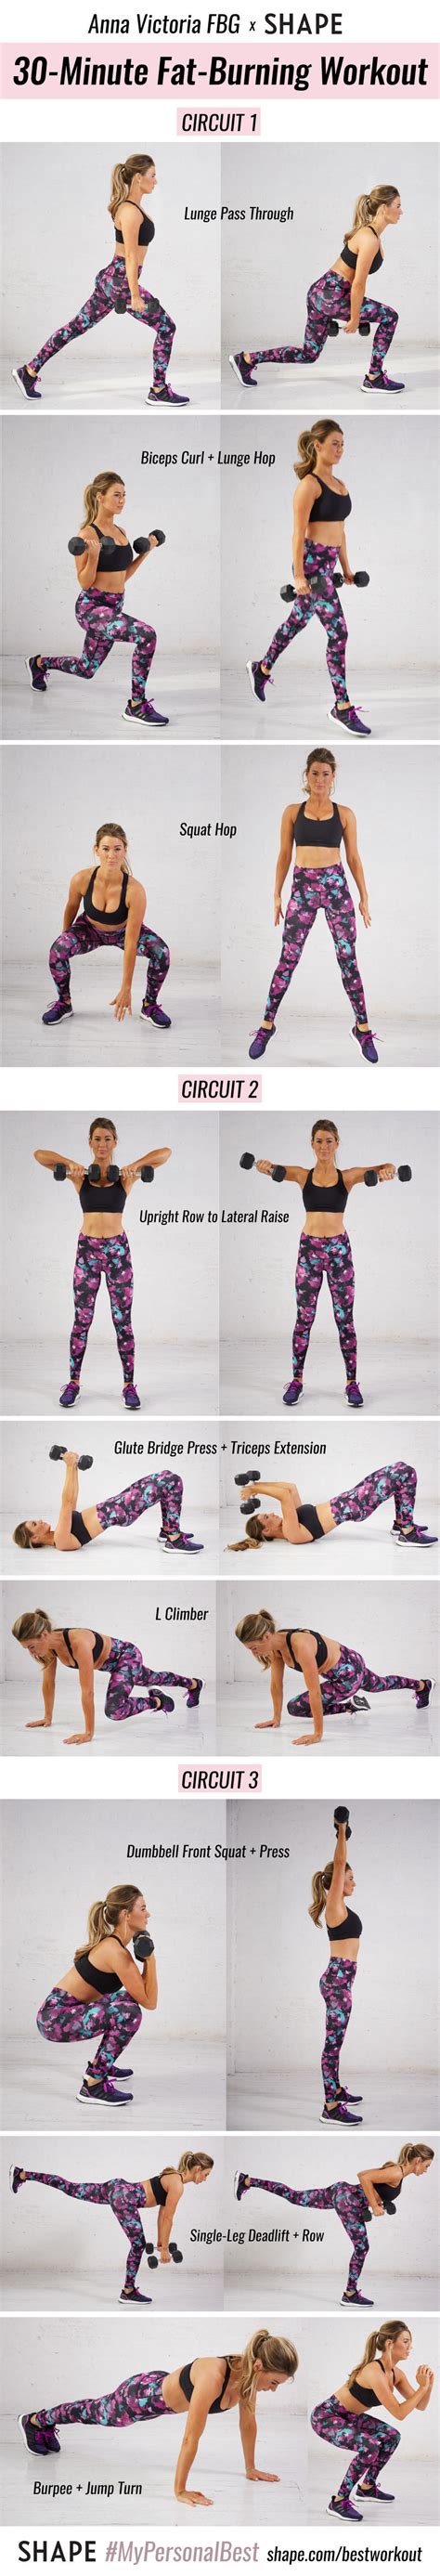 Our workouts that burn fat only require a pair of dumbbells. This Fat-Burning Workout By Anna Victoria Will Help You ...